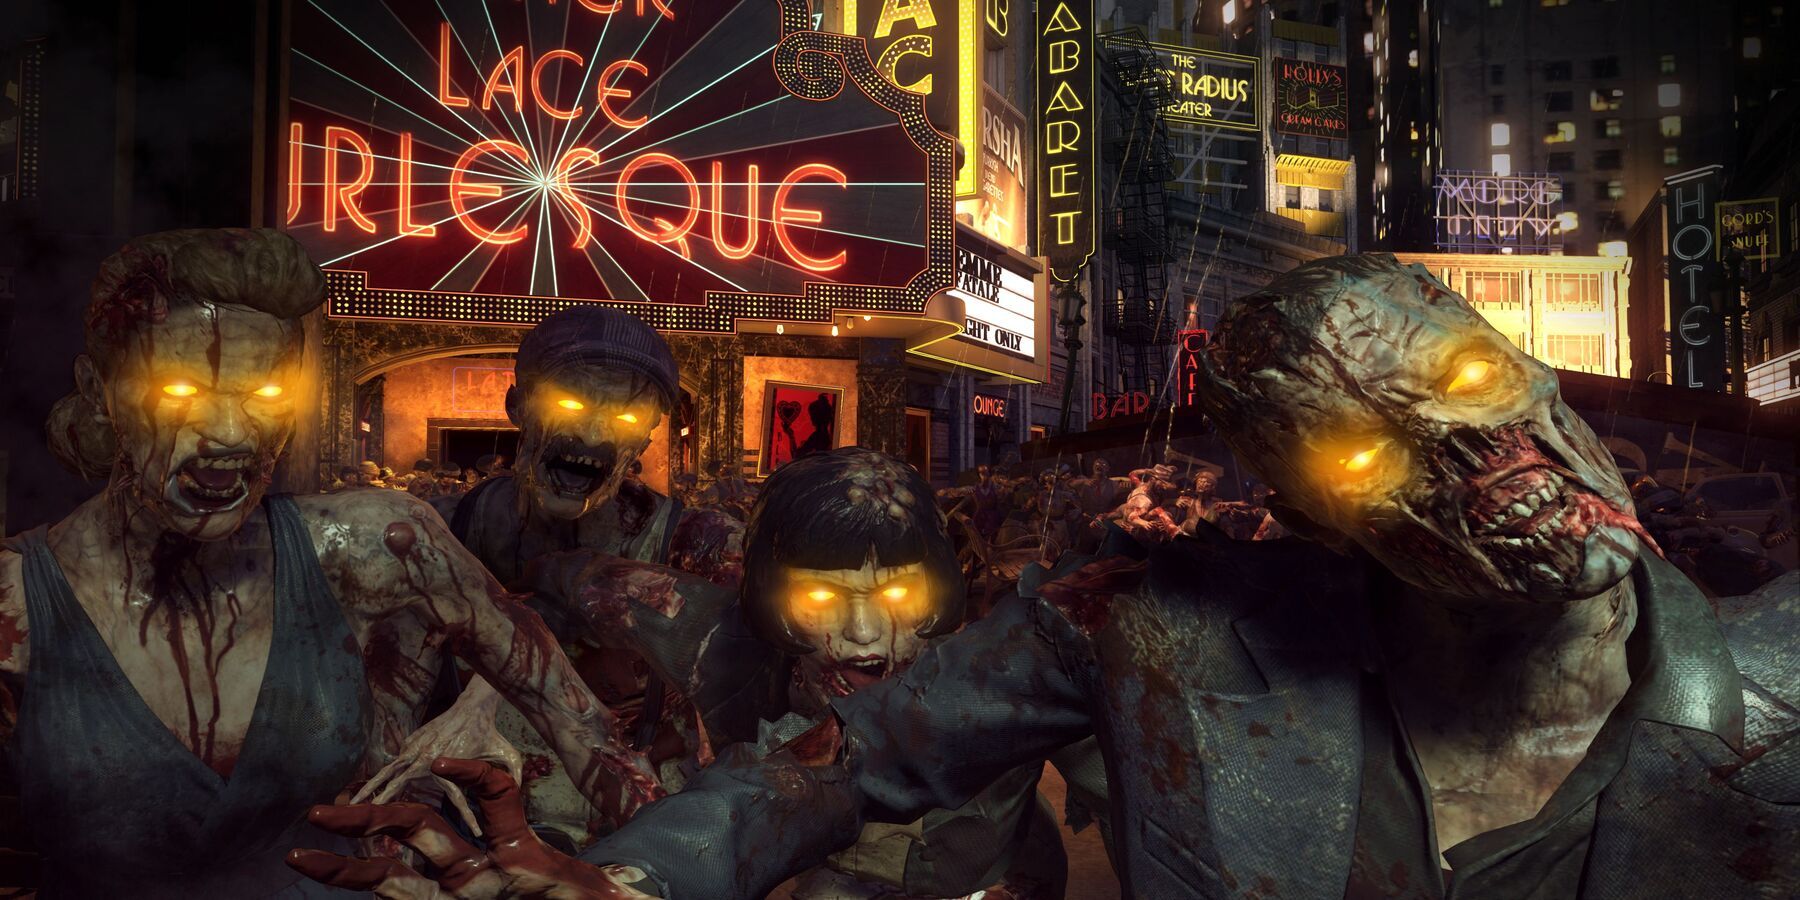 Black Ops 3 Zombies is still played today